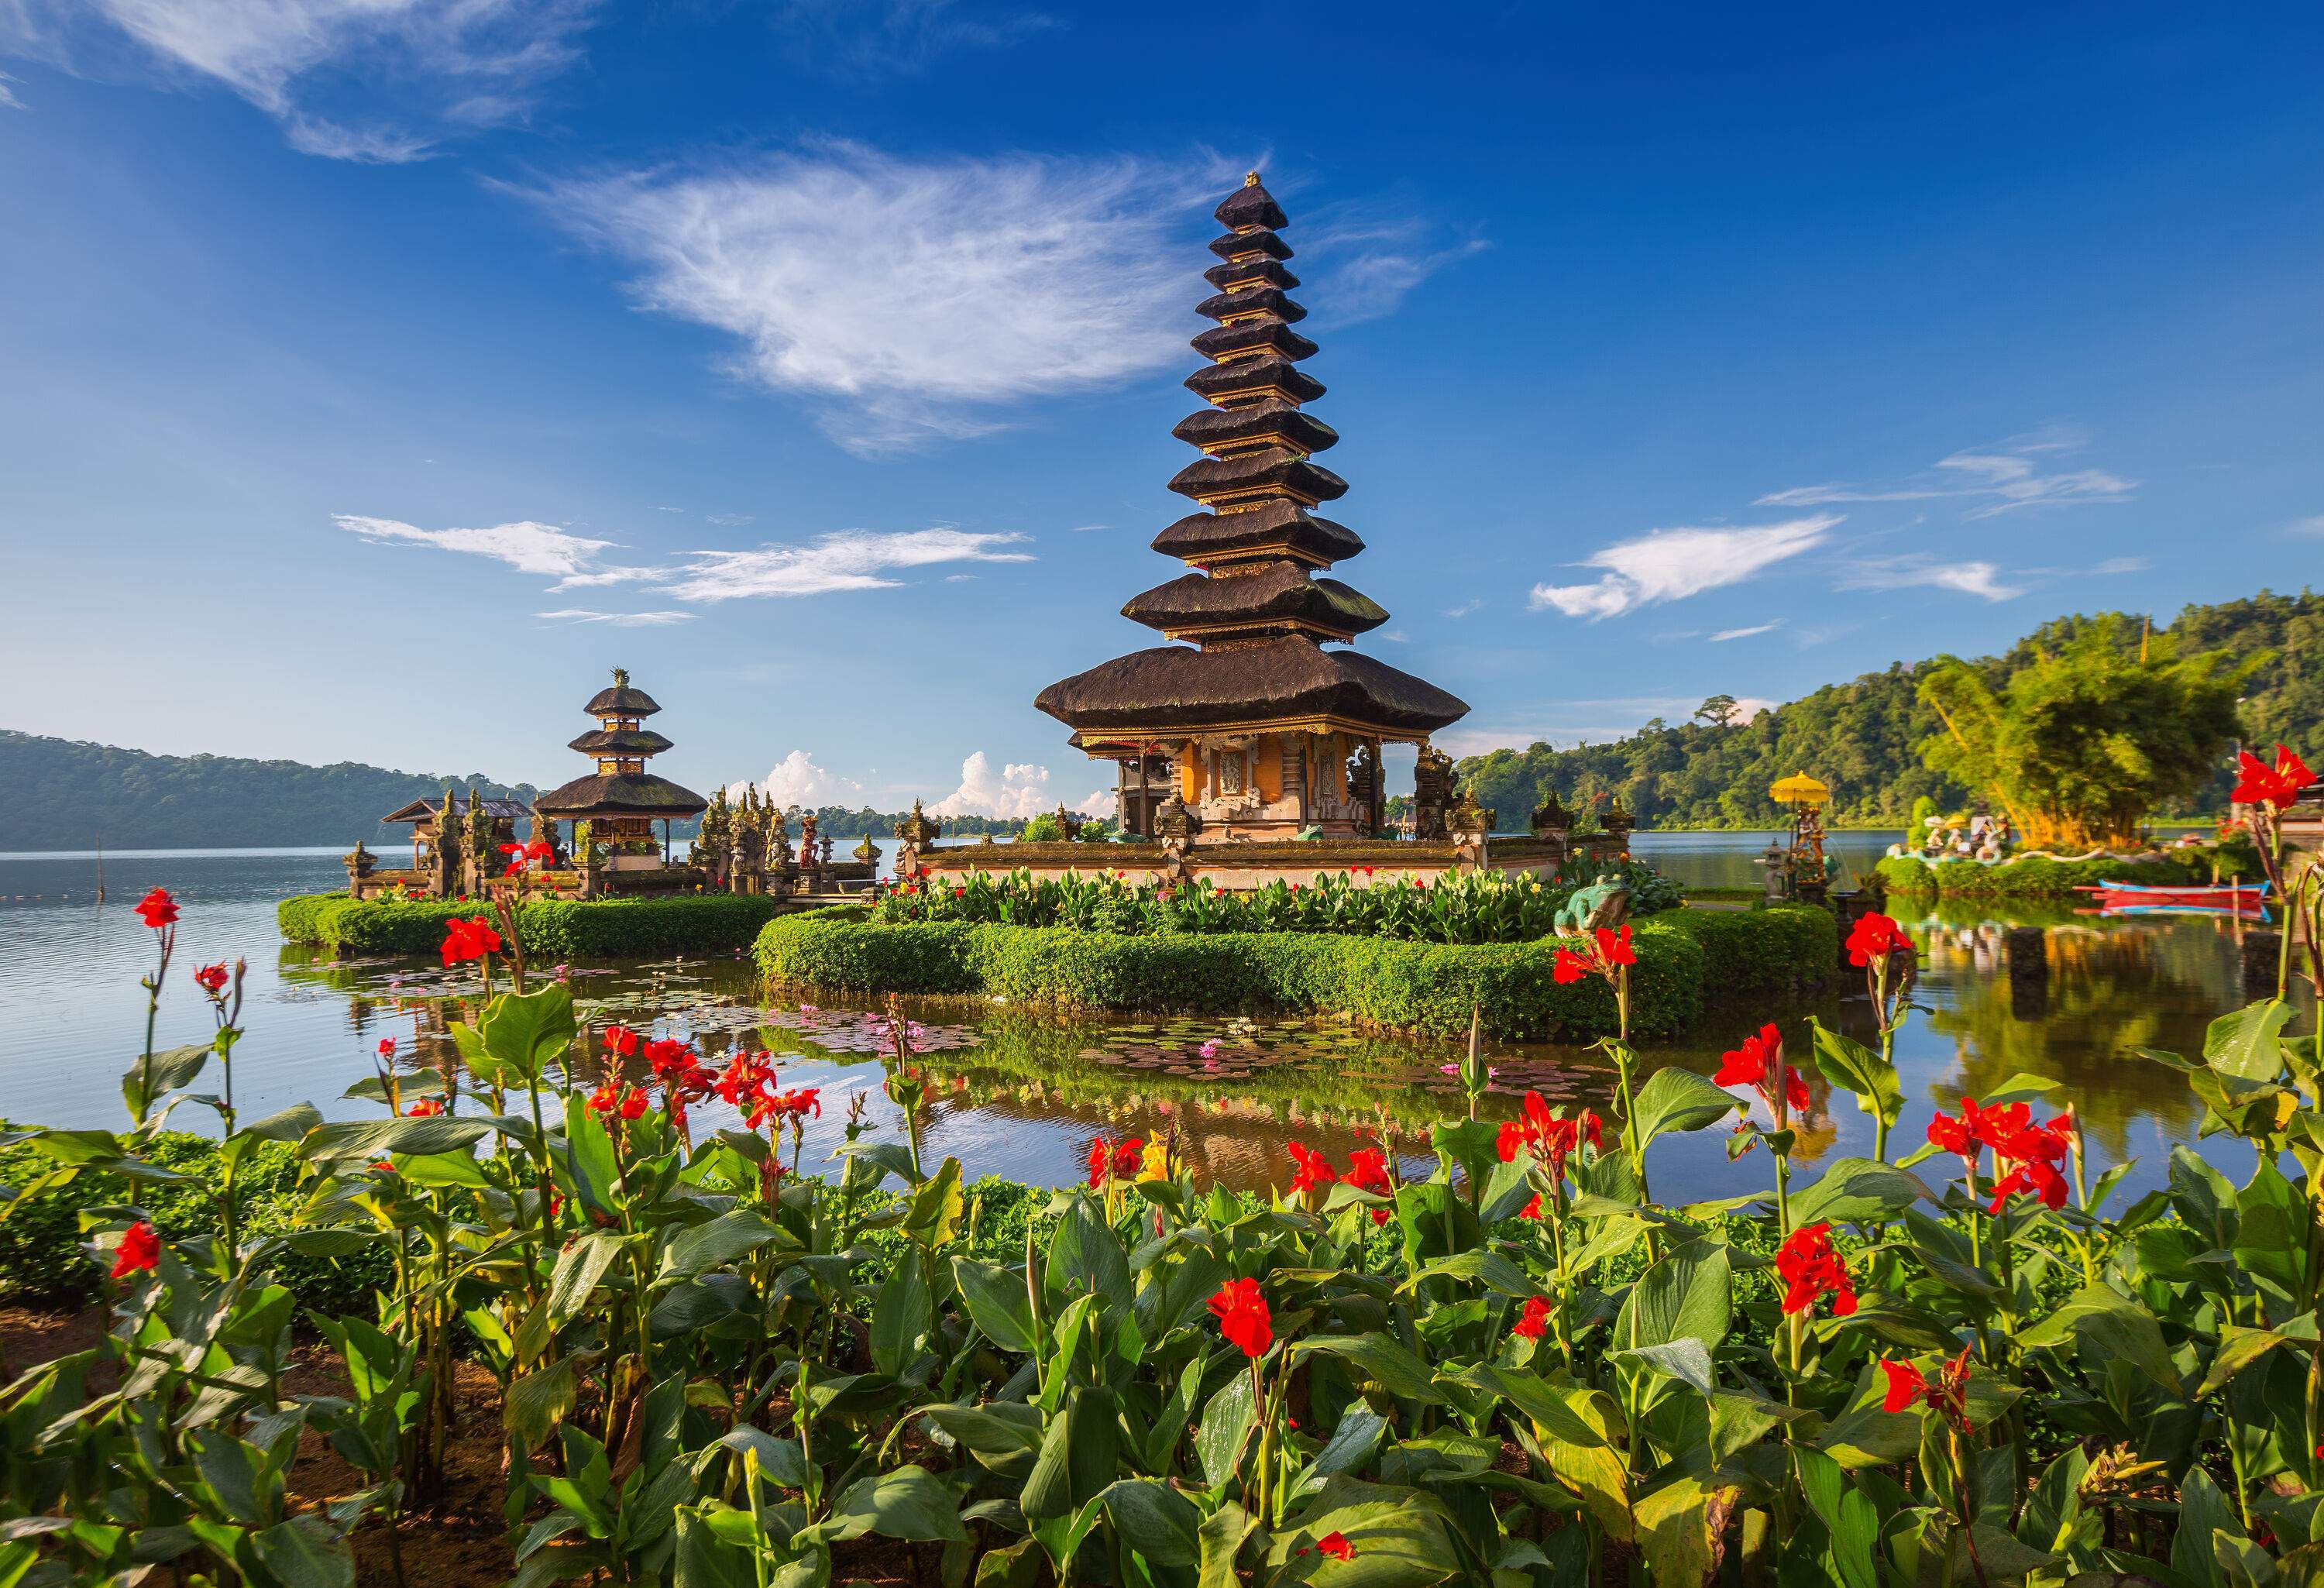 Pura Ulun Danu Bratan is a Hindu temple with multilevel pagoda-style thatched roofs nestled beside a lake and surrounded by a flower garden.